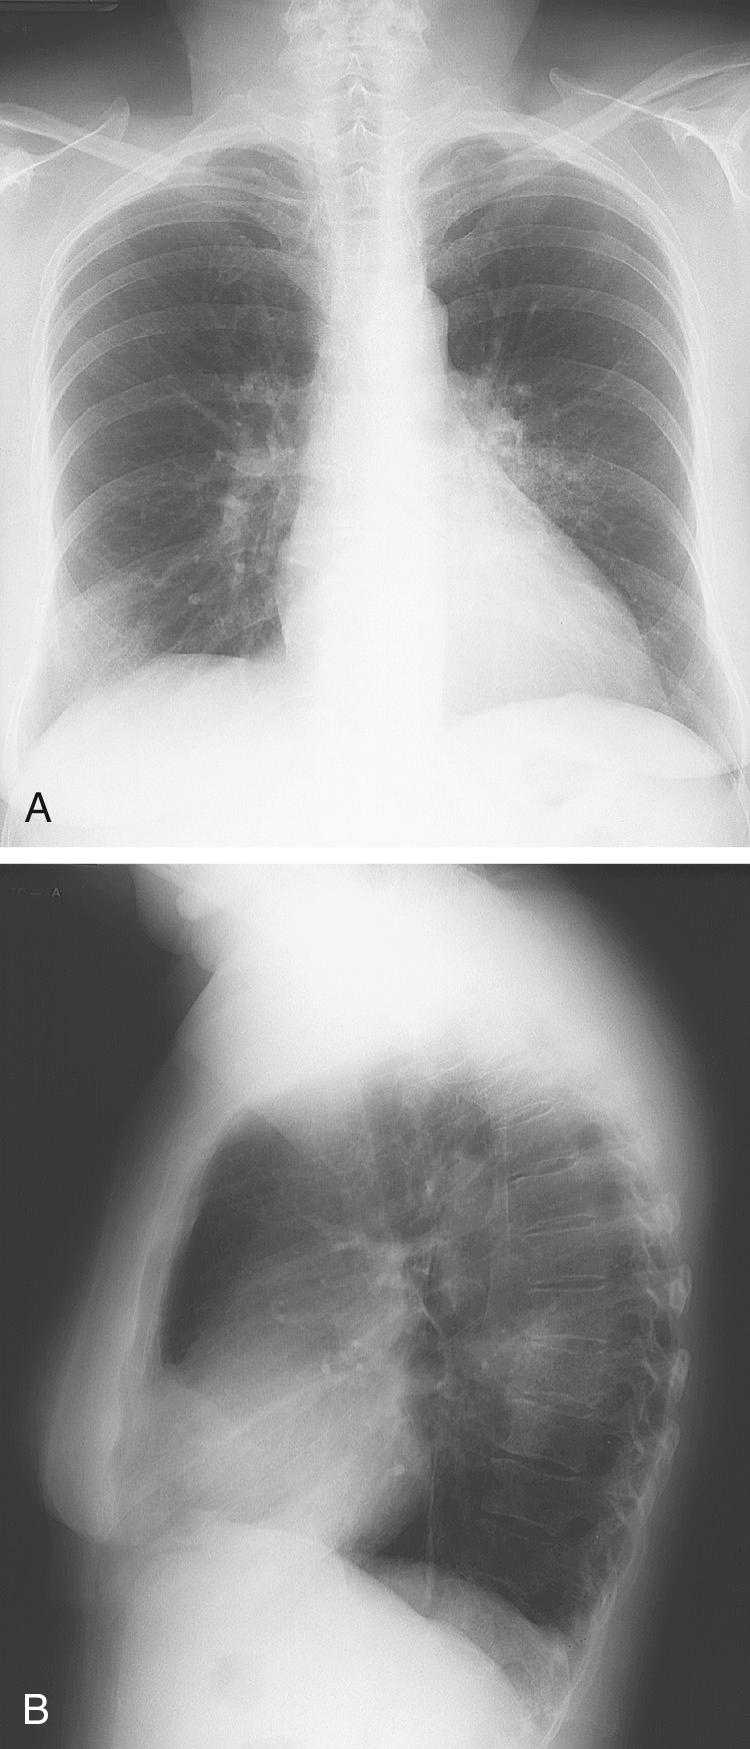 FIGURE 12-1, Posteroanterior (A) and lateral (B) chest radiographs demonstrating segmental pneumonia involving the superior segment of the left lower lobe.